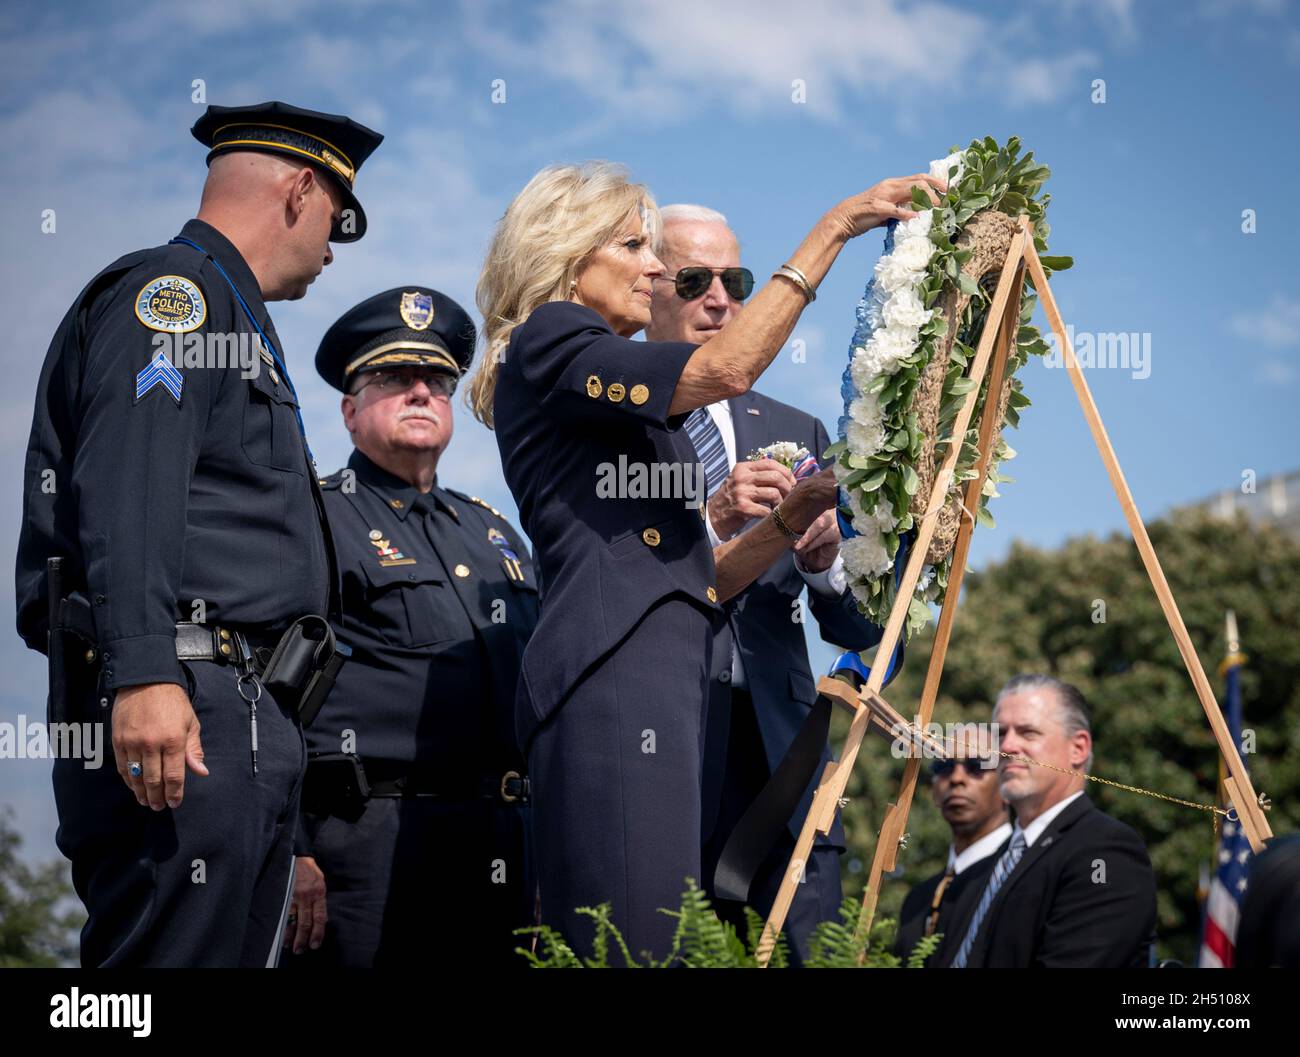 Washington, United States of America. 16 October, 2021. U.S President Joe Biden and First Lady Dr. Jill Biden place a wreath during a ceremony honoring fallen law enforcement officers at the 40th annual National Peace Officers Memorial Service at the U.S. Capitol October 16, 2021 in Washington, D.C. Credit: Benjamin Applebaum/Homeland Security/Alamy Live News Stock Photo